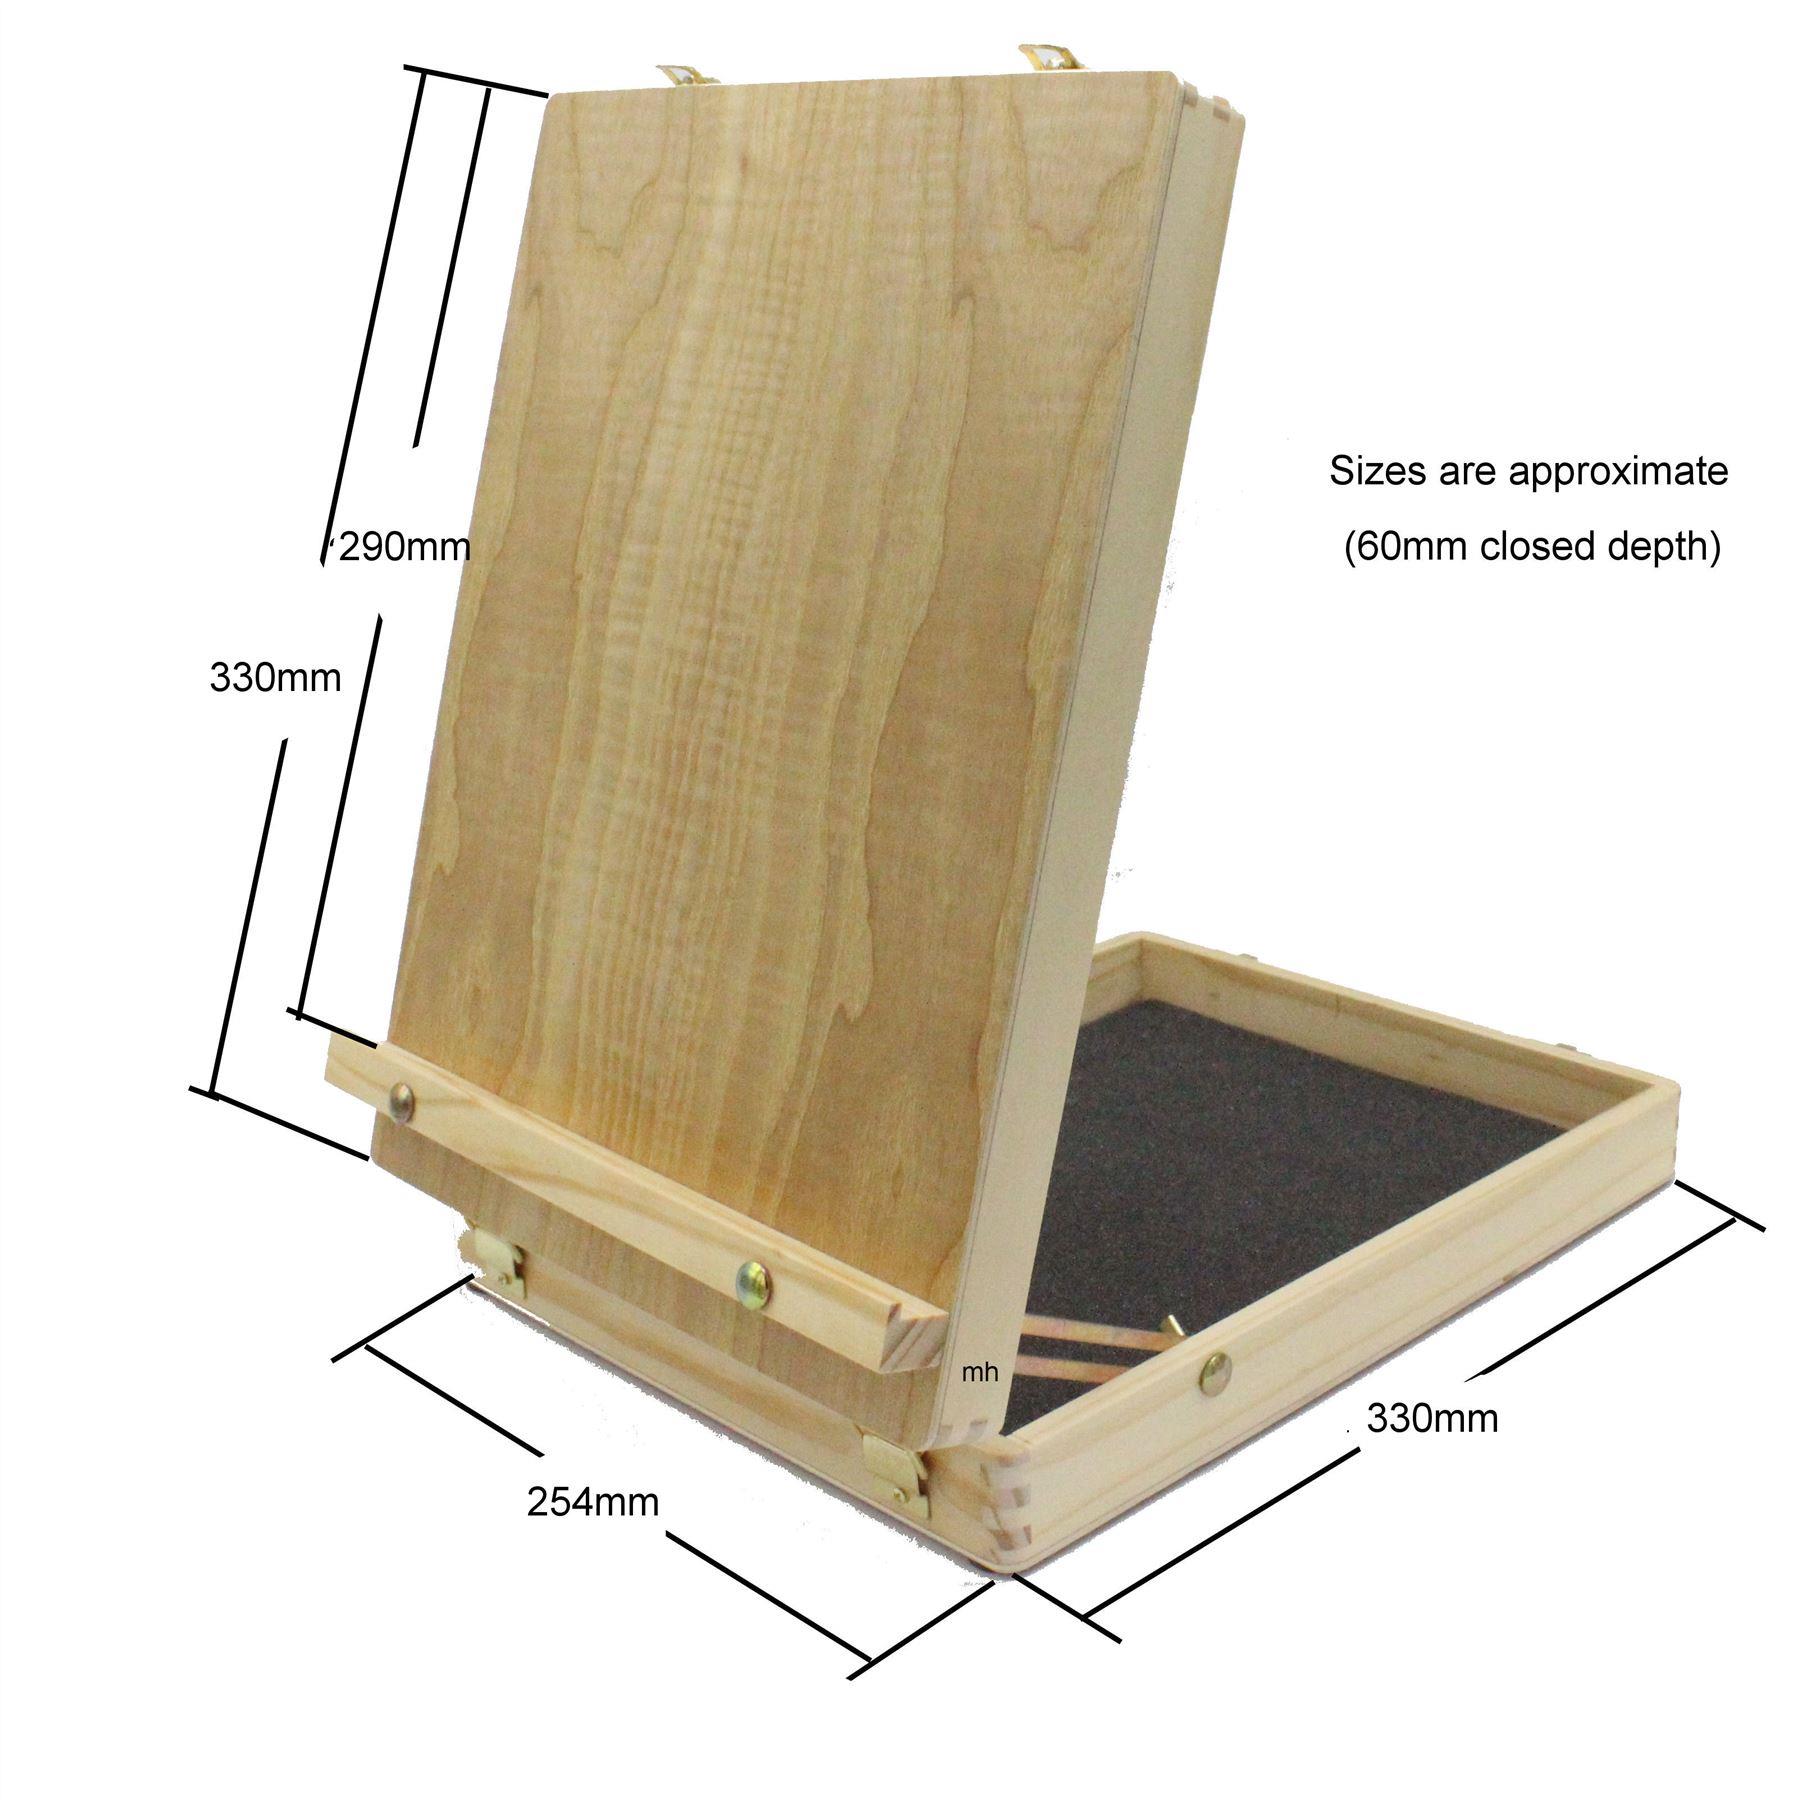 sizes of artists wooden table top easel